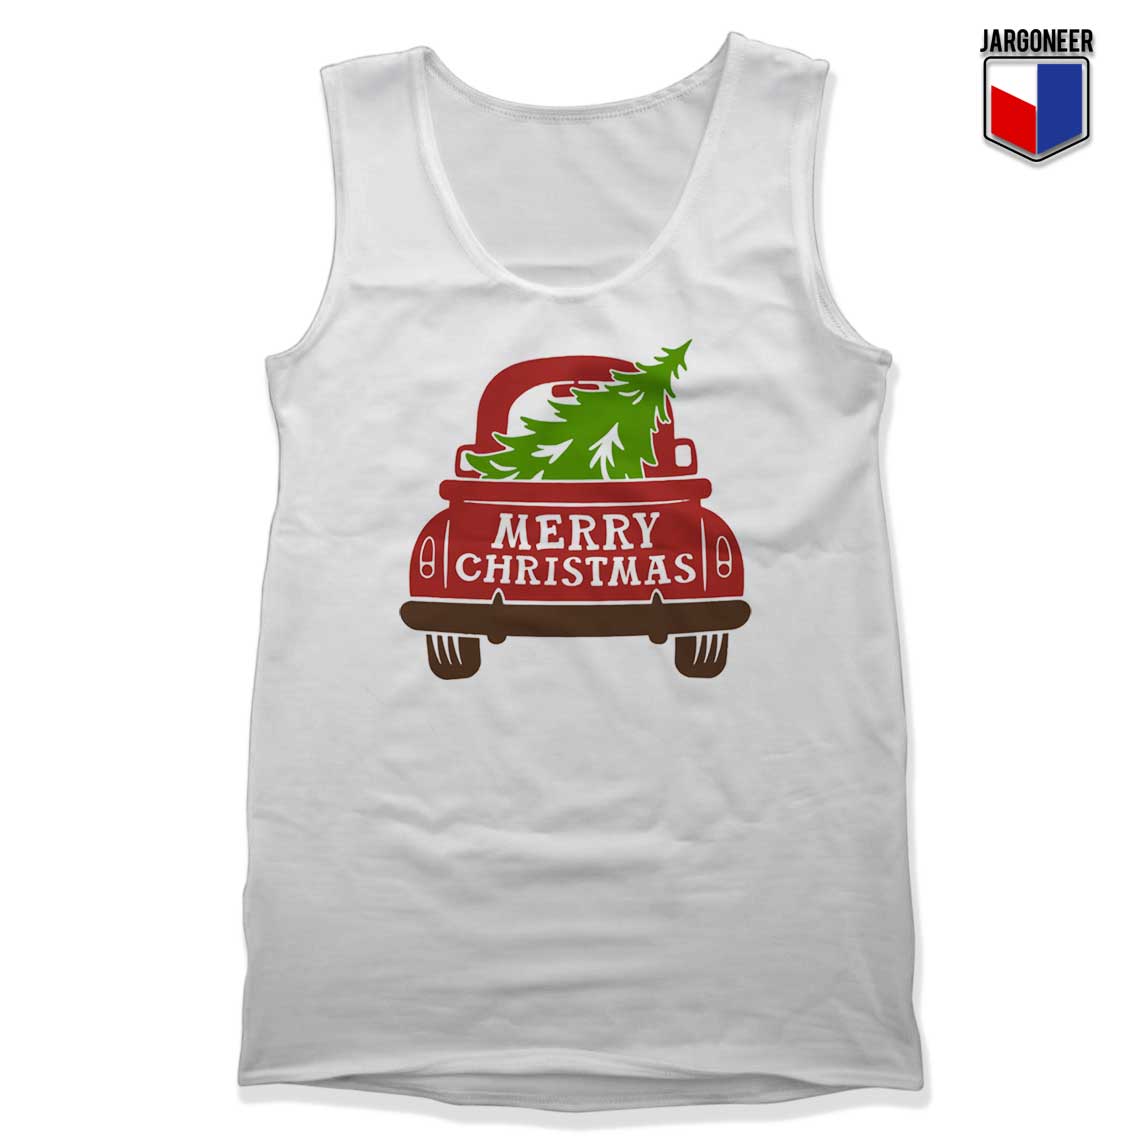 Red Truck Merry Christmas Tank Top - Shop Unique Graphic Cool Shirt Designs